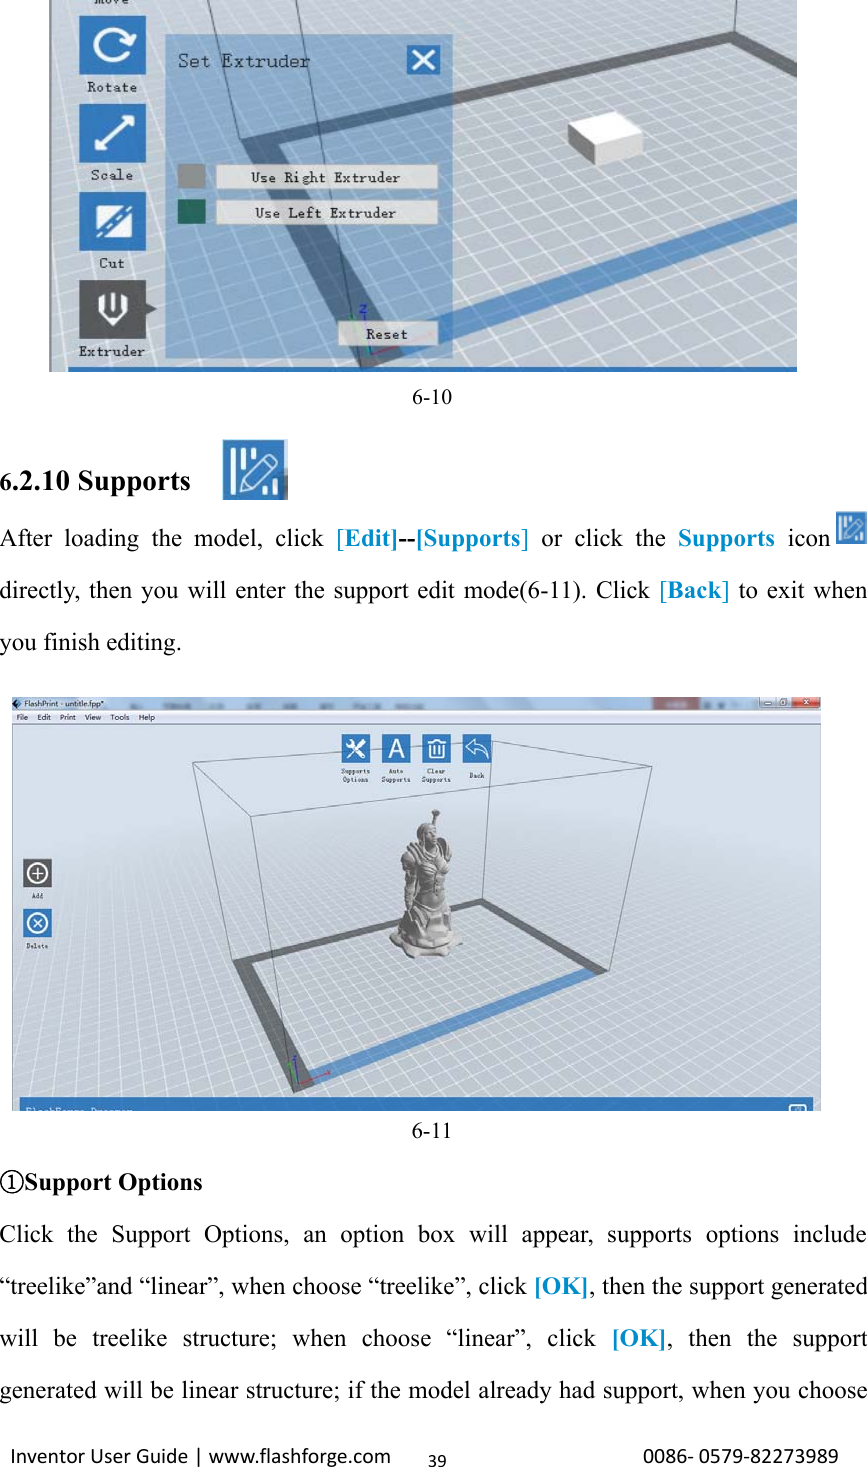 Inventor User Guide | www.flashforge.com 0086‐0579‐82273989396-106.2.10 SupportsAfter loading the model, click [Edit]--[Supports]or click the Supports icondirectly, then you will enter the support edit mode(6-11). Click [Back]to exit whenyou finish editing.6-11①Support OptionsClick the Support Options, an option box will appear, supports options include“treelike”and “linear”, when choose “treelike”, click [OK], then the support generatedwill be treelike structure; when choose “linear”, click [OK], then the supportgenerated will be linear structure; if the model already had support, when you choose